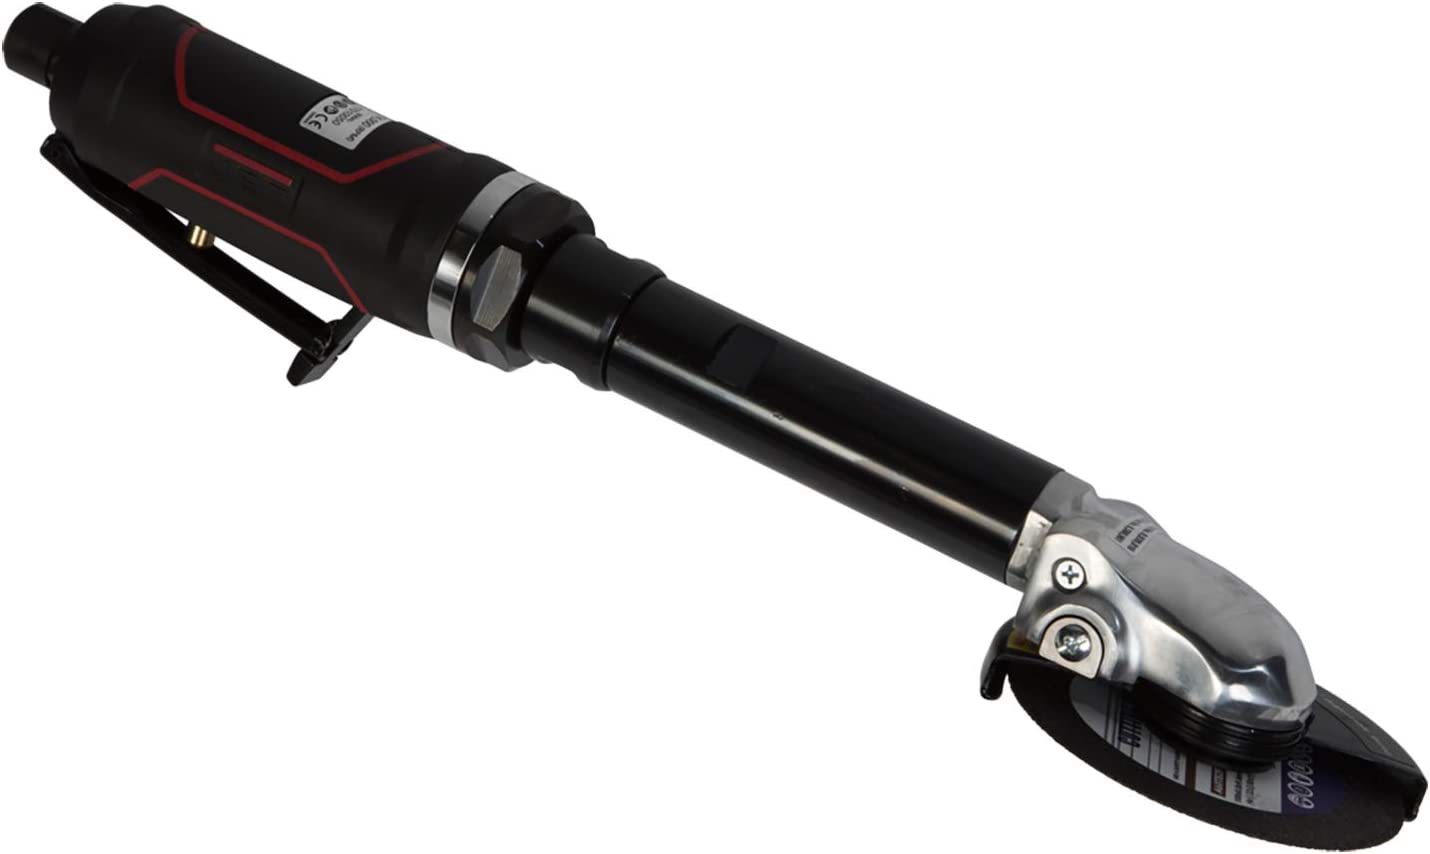 Jet Jat-483, 4-Inch Pneumatic Extended Cut-Off Tool, 1Hp (505483). - $477.92